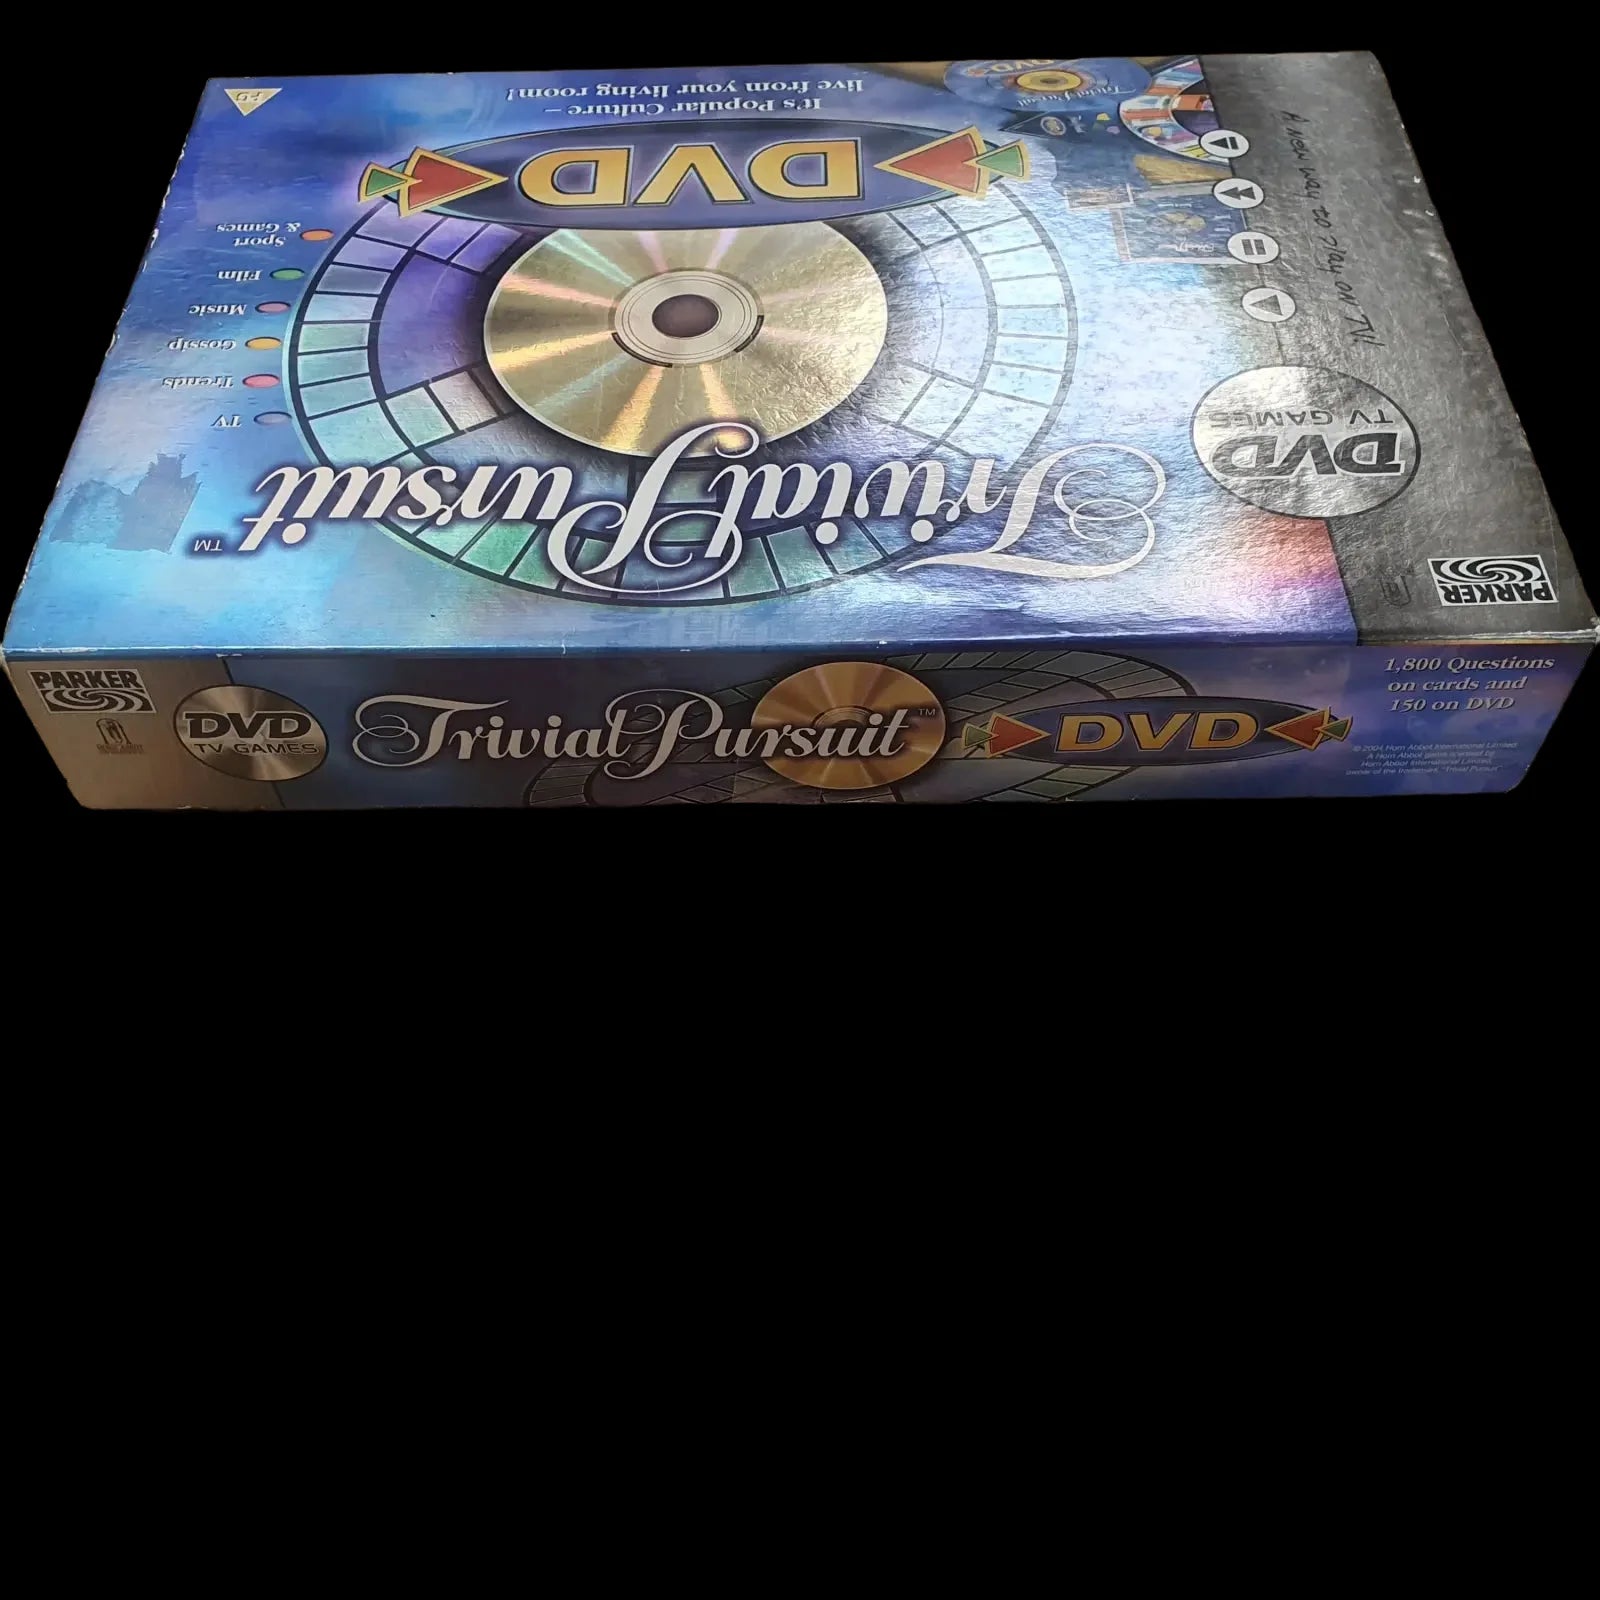 Trivial Pursuit Dvd Boxed Board Game 2004 - Games - Parker